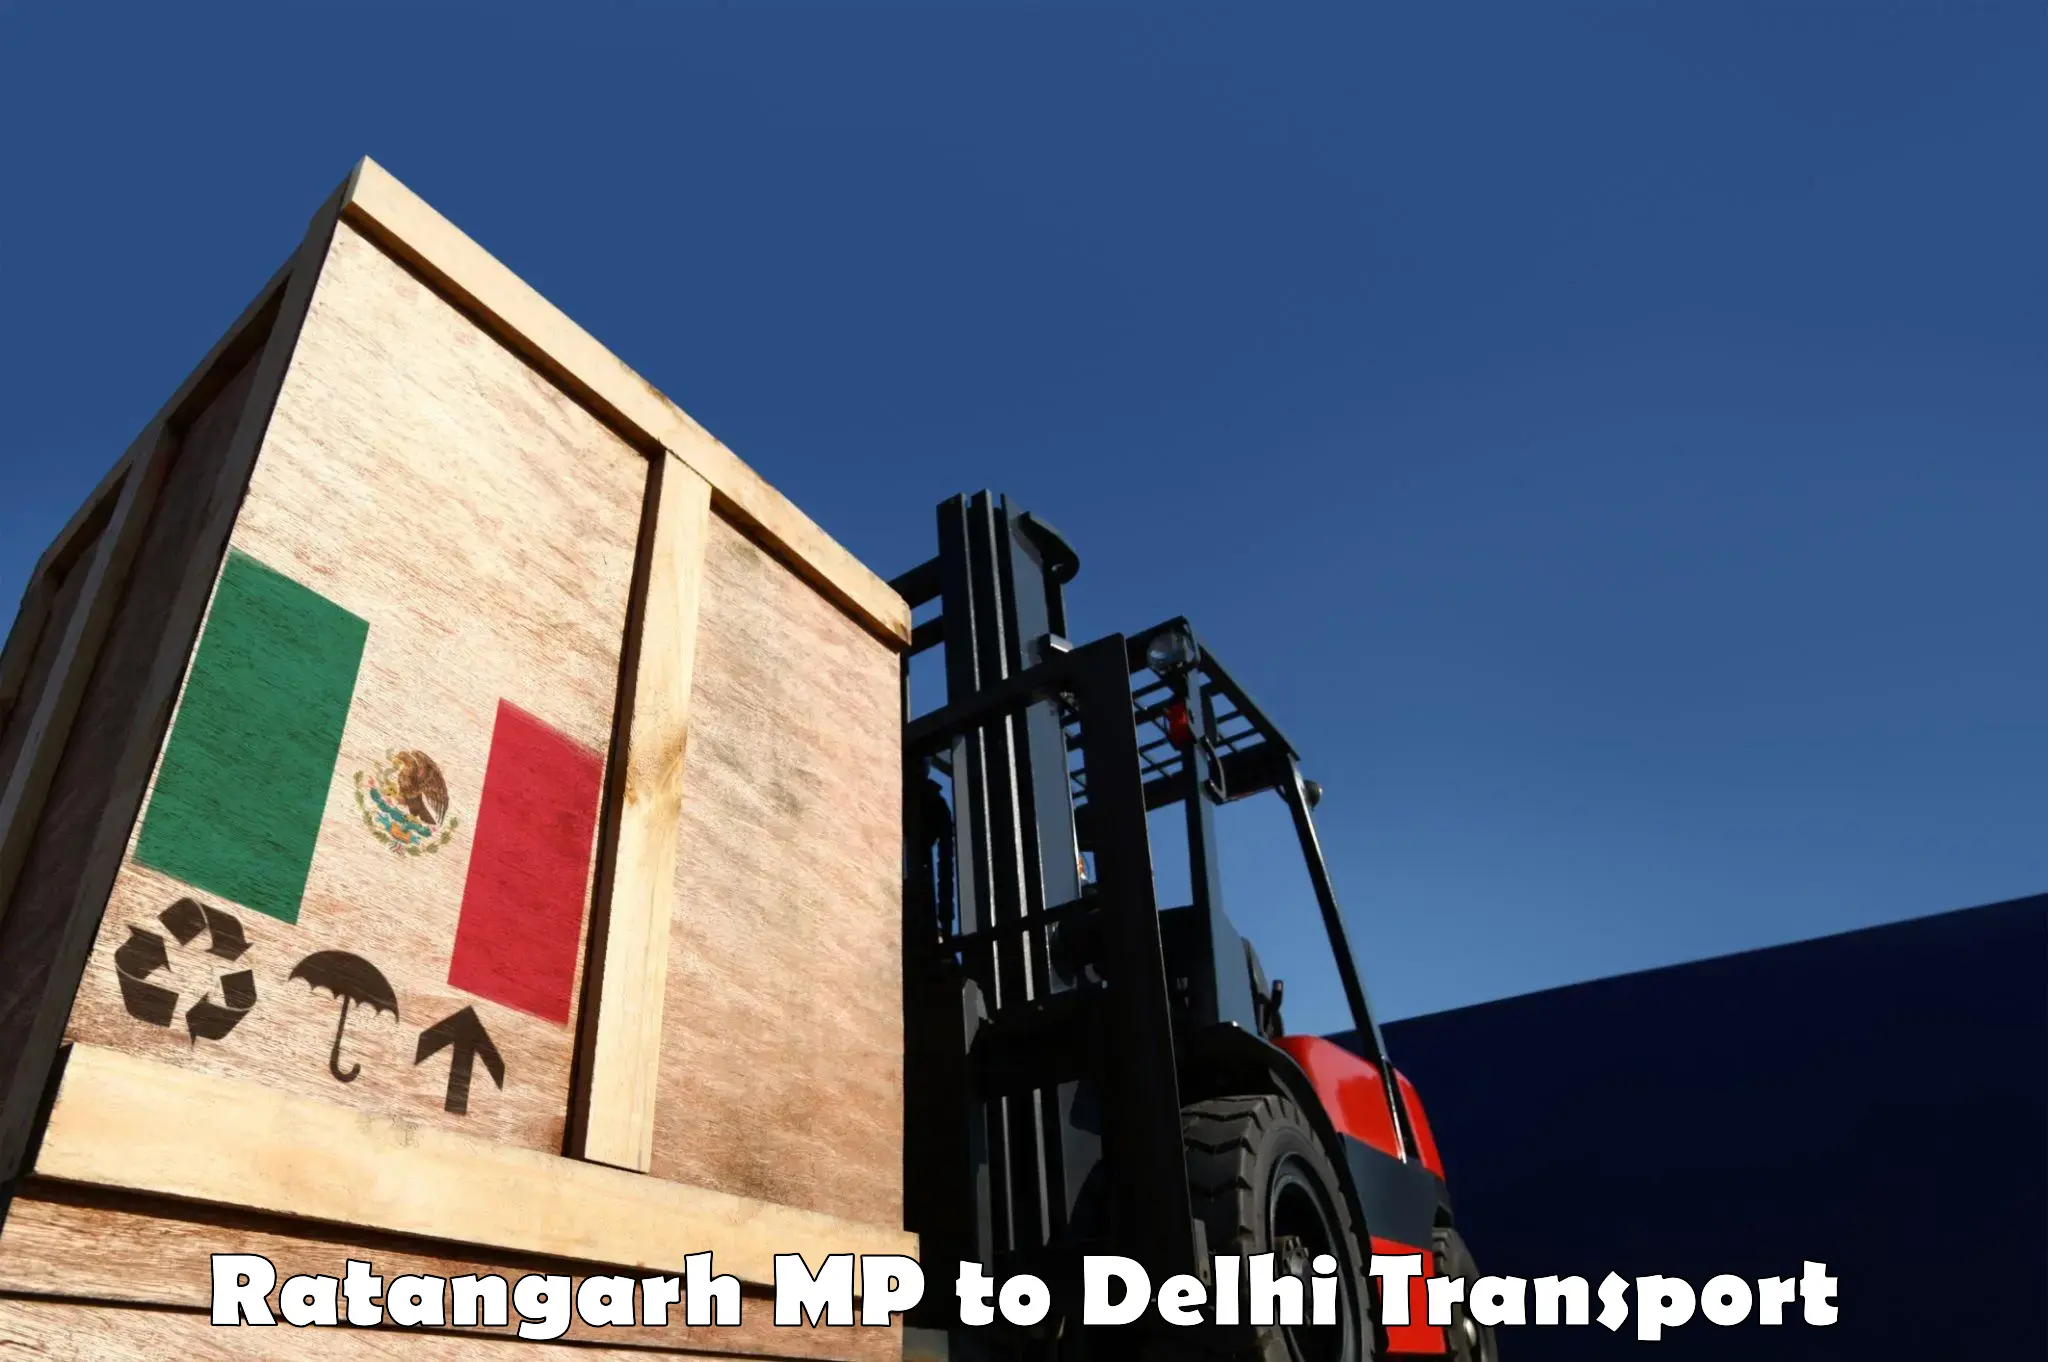 Best transport services in India Ratangarh MP to Delhi